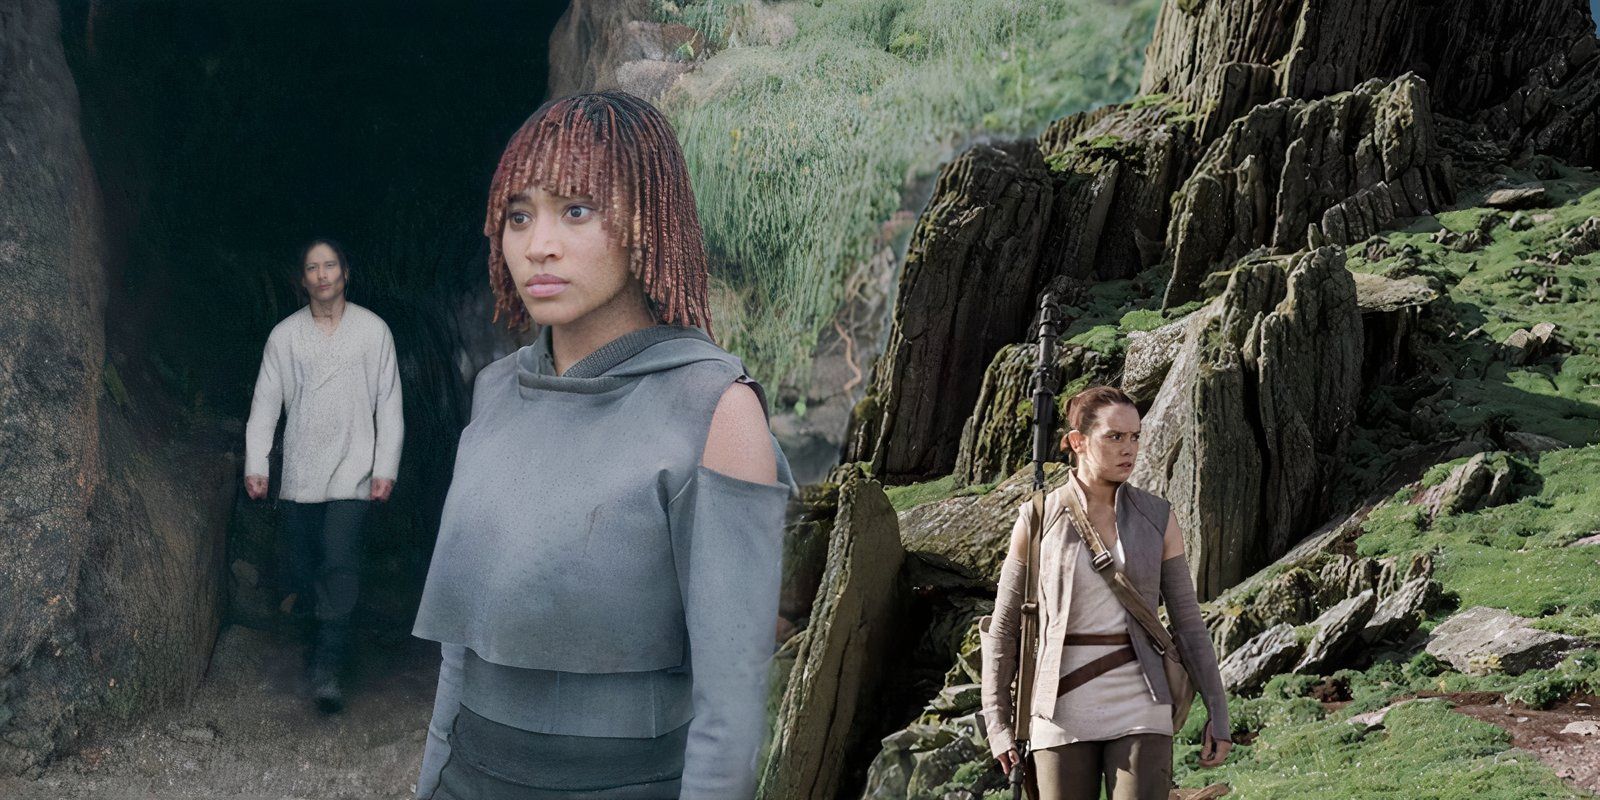 Osha Aniseya (Amandla Stenberg) and Qimir (Manny Jacinto) stand outside of a cave on an unknown planet in The Acolyte next to Rey Skywalker (Daisy Ridley) walking along the surface of Ahch-To in Star Wars: The Last Jedi